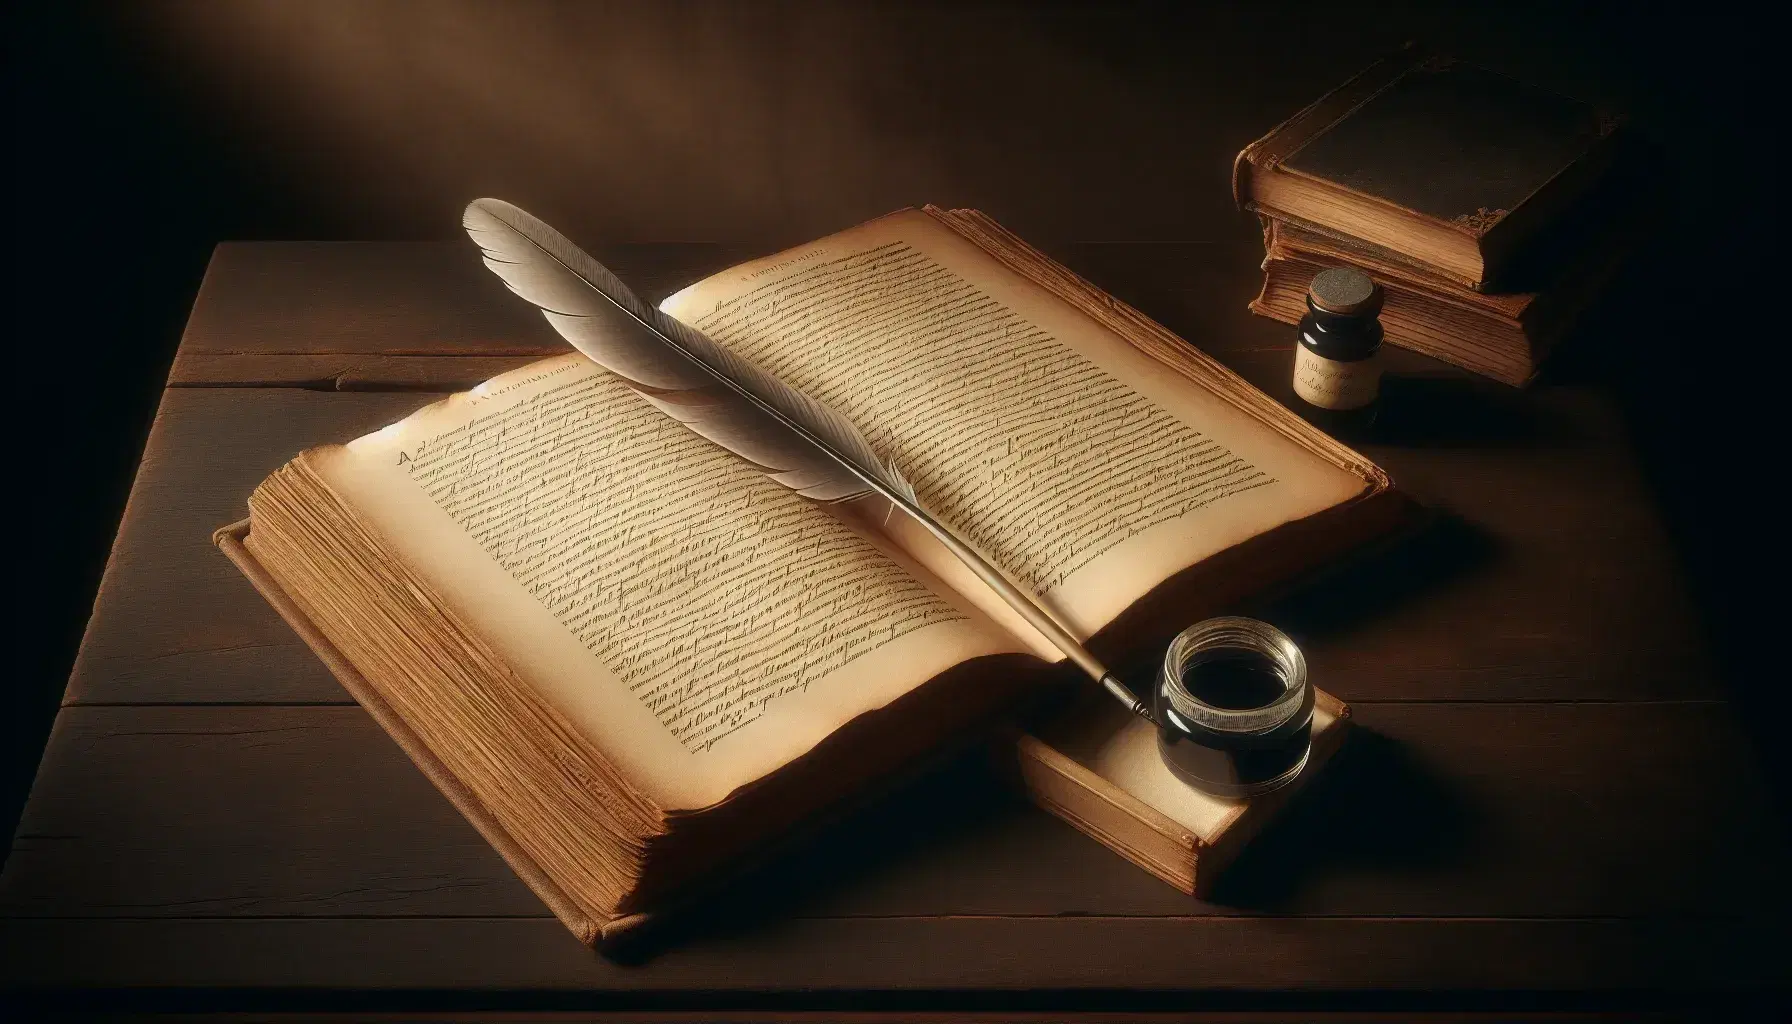 Open antique book on dark table with yellowed pages, quill pen and glass inkwell with black ink, soft lighting.